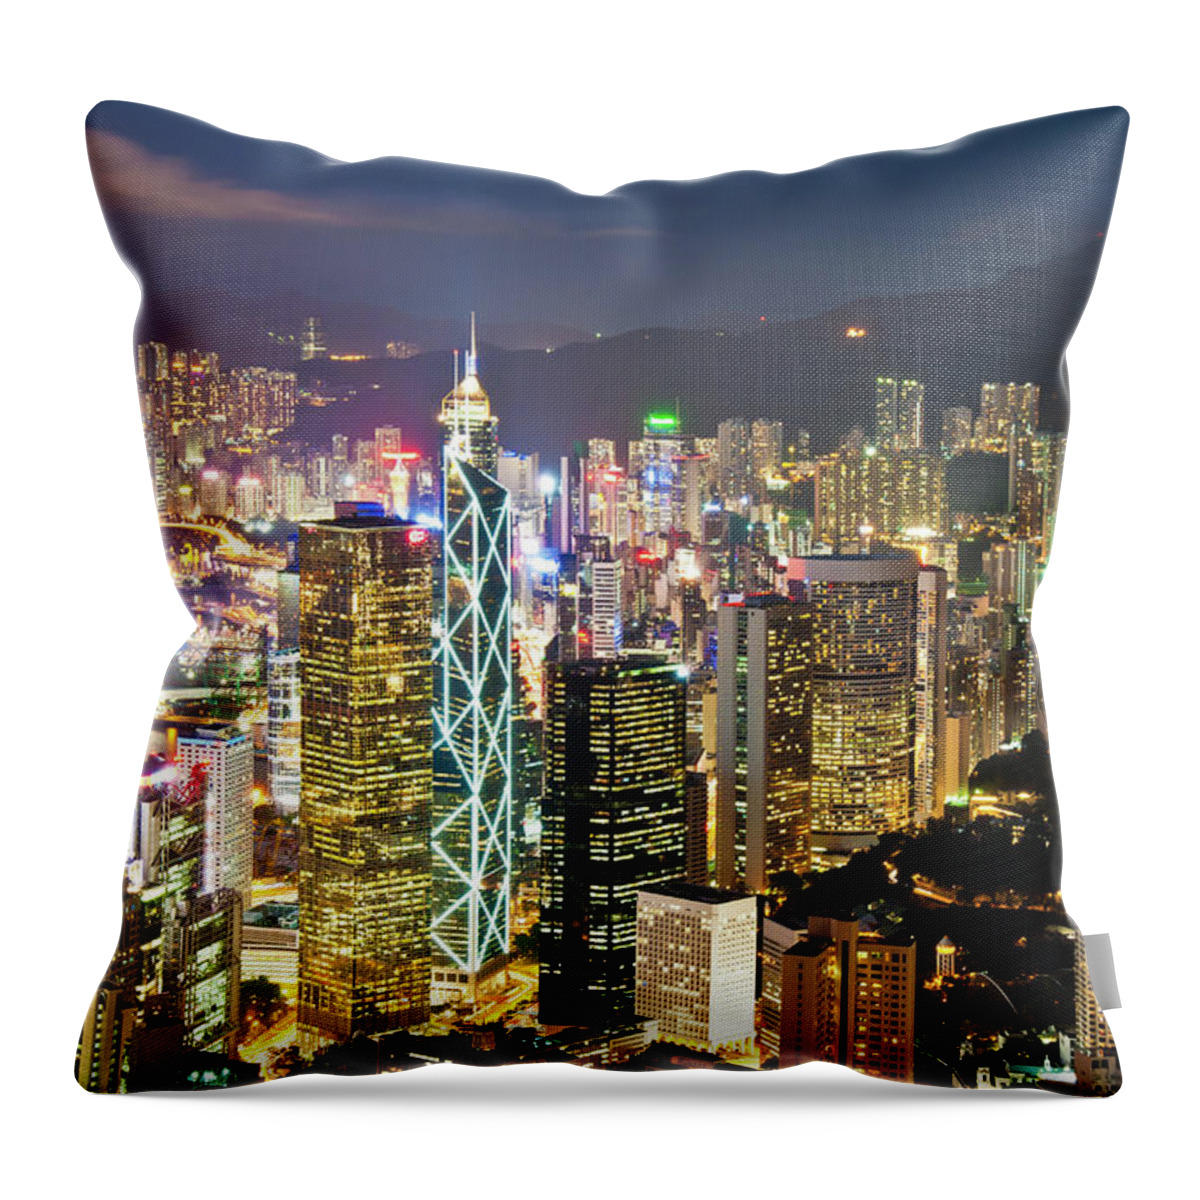 Population Explosion Throw Pillow featuring the photograph The Lights Of Hong Kong Seen Fromthe by Tom Bonaventure